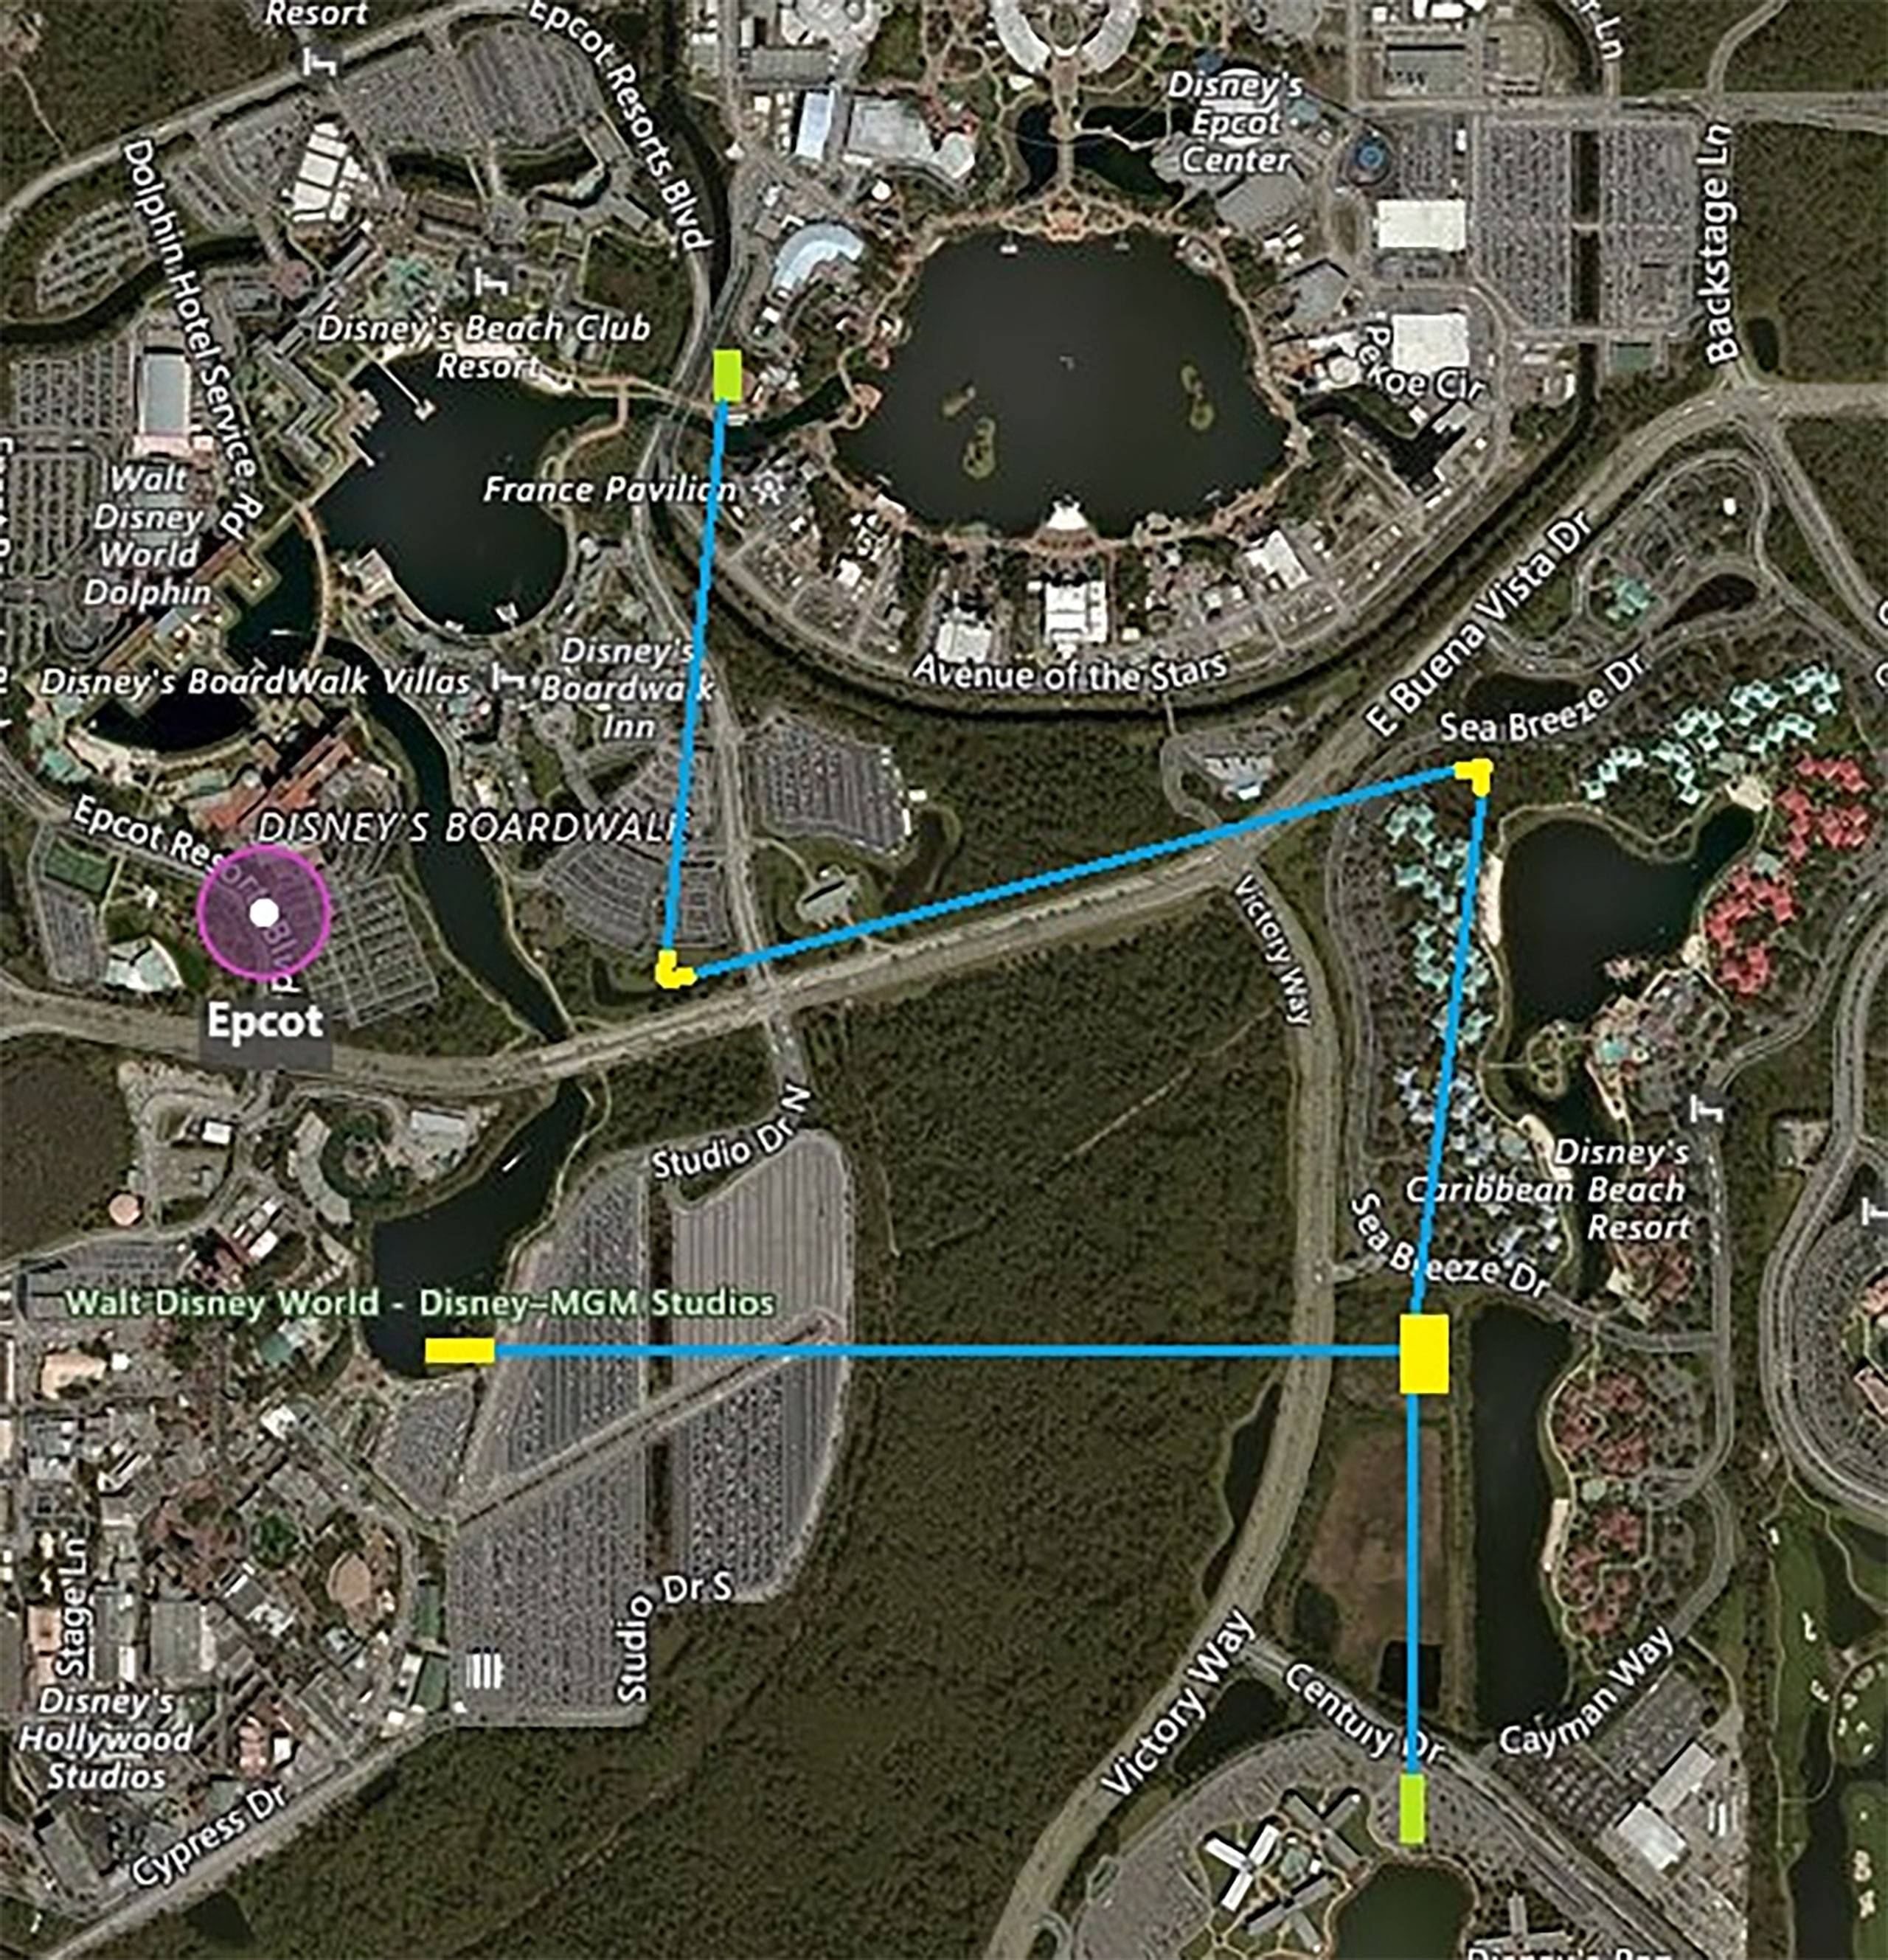 Is the Walt Disney World Gondola System about to become a reality?